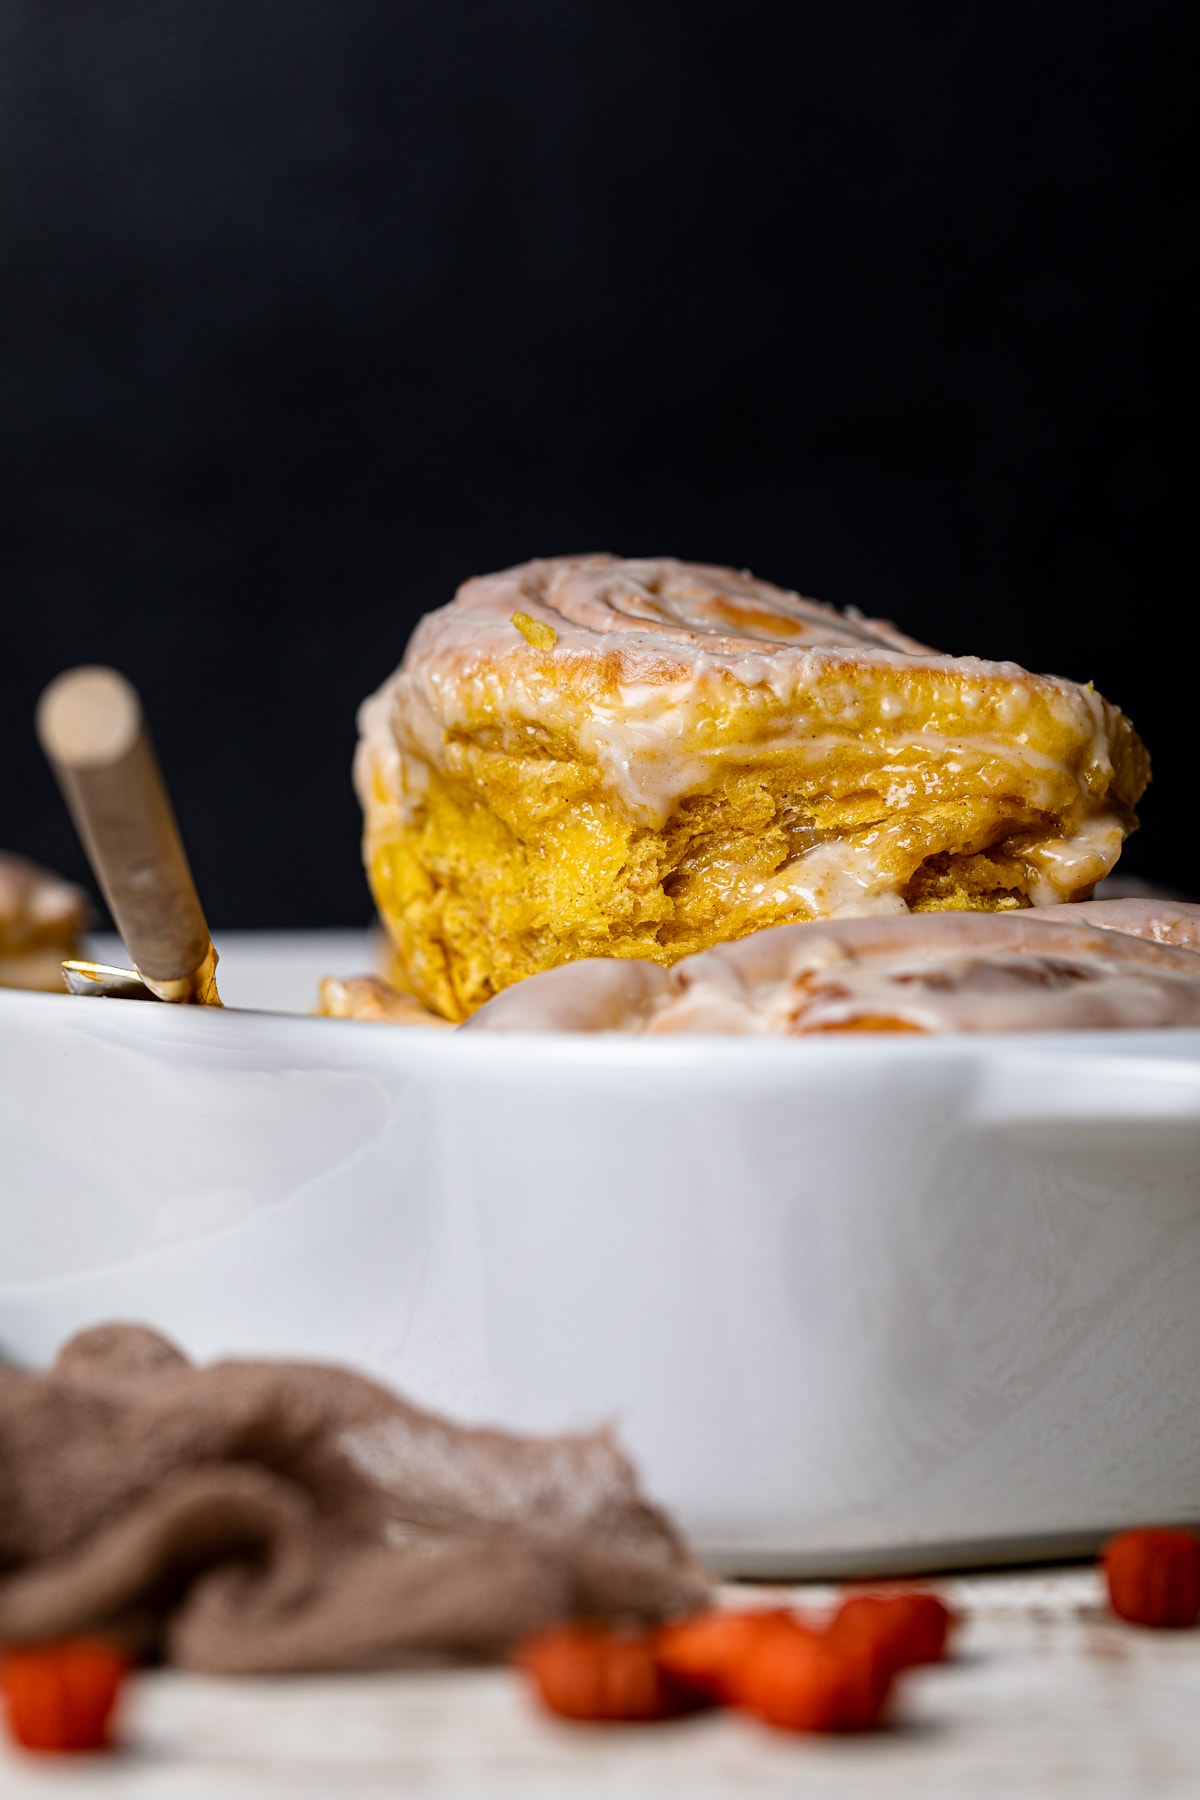 Vegan Pumpkin Cinnamon Roll being removed from a baking dish.